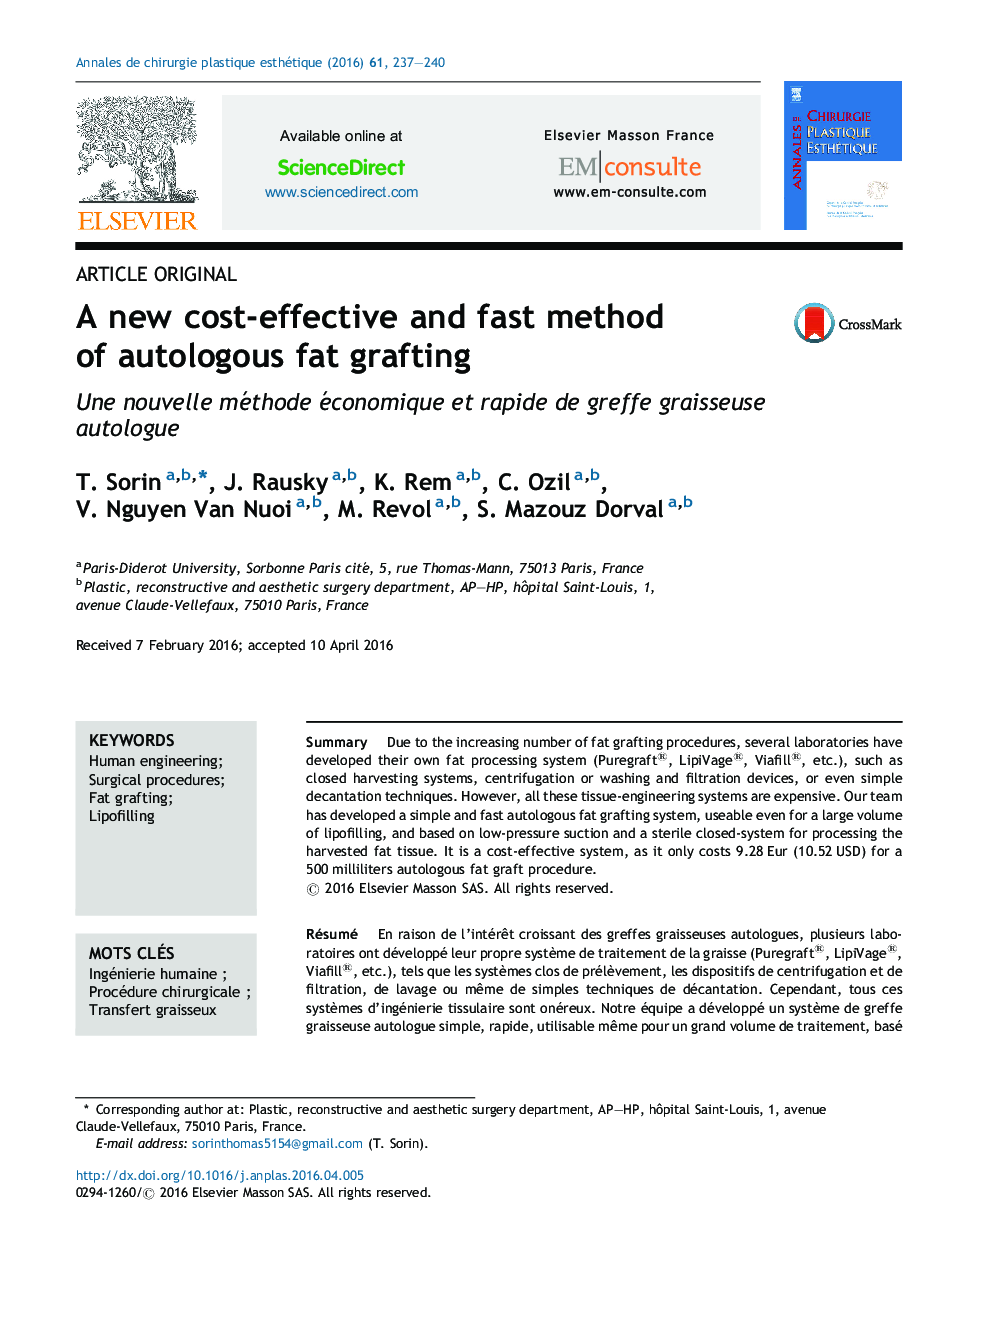 A new cost-effective and fast method of autologous fat grafting